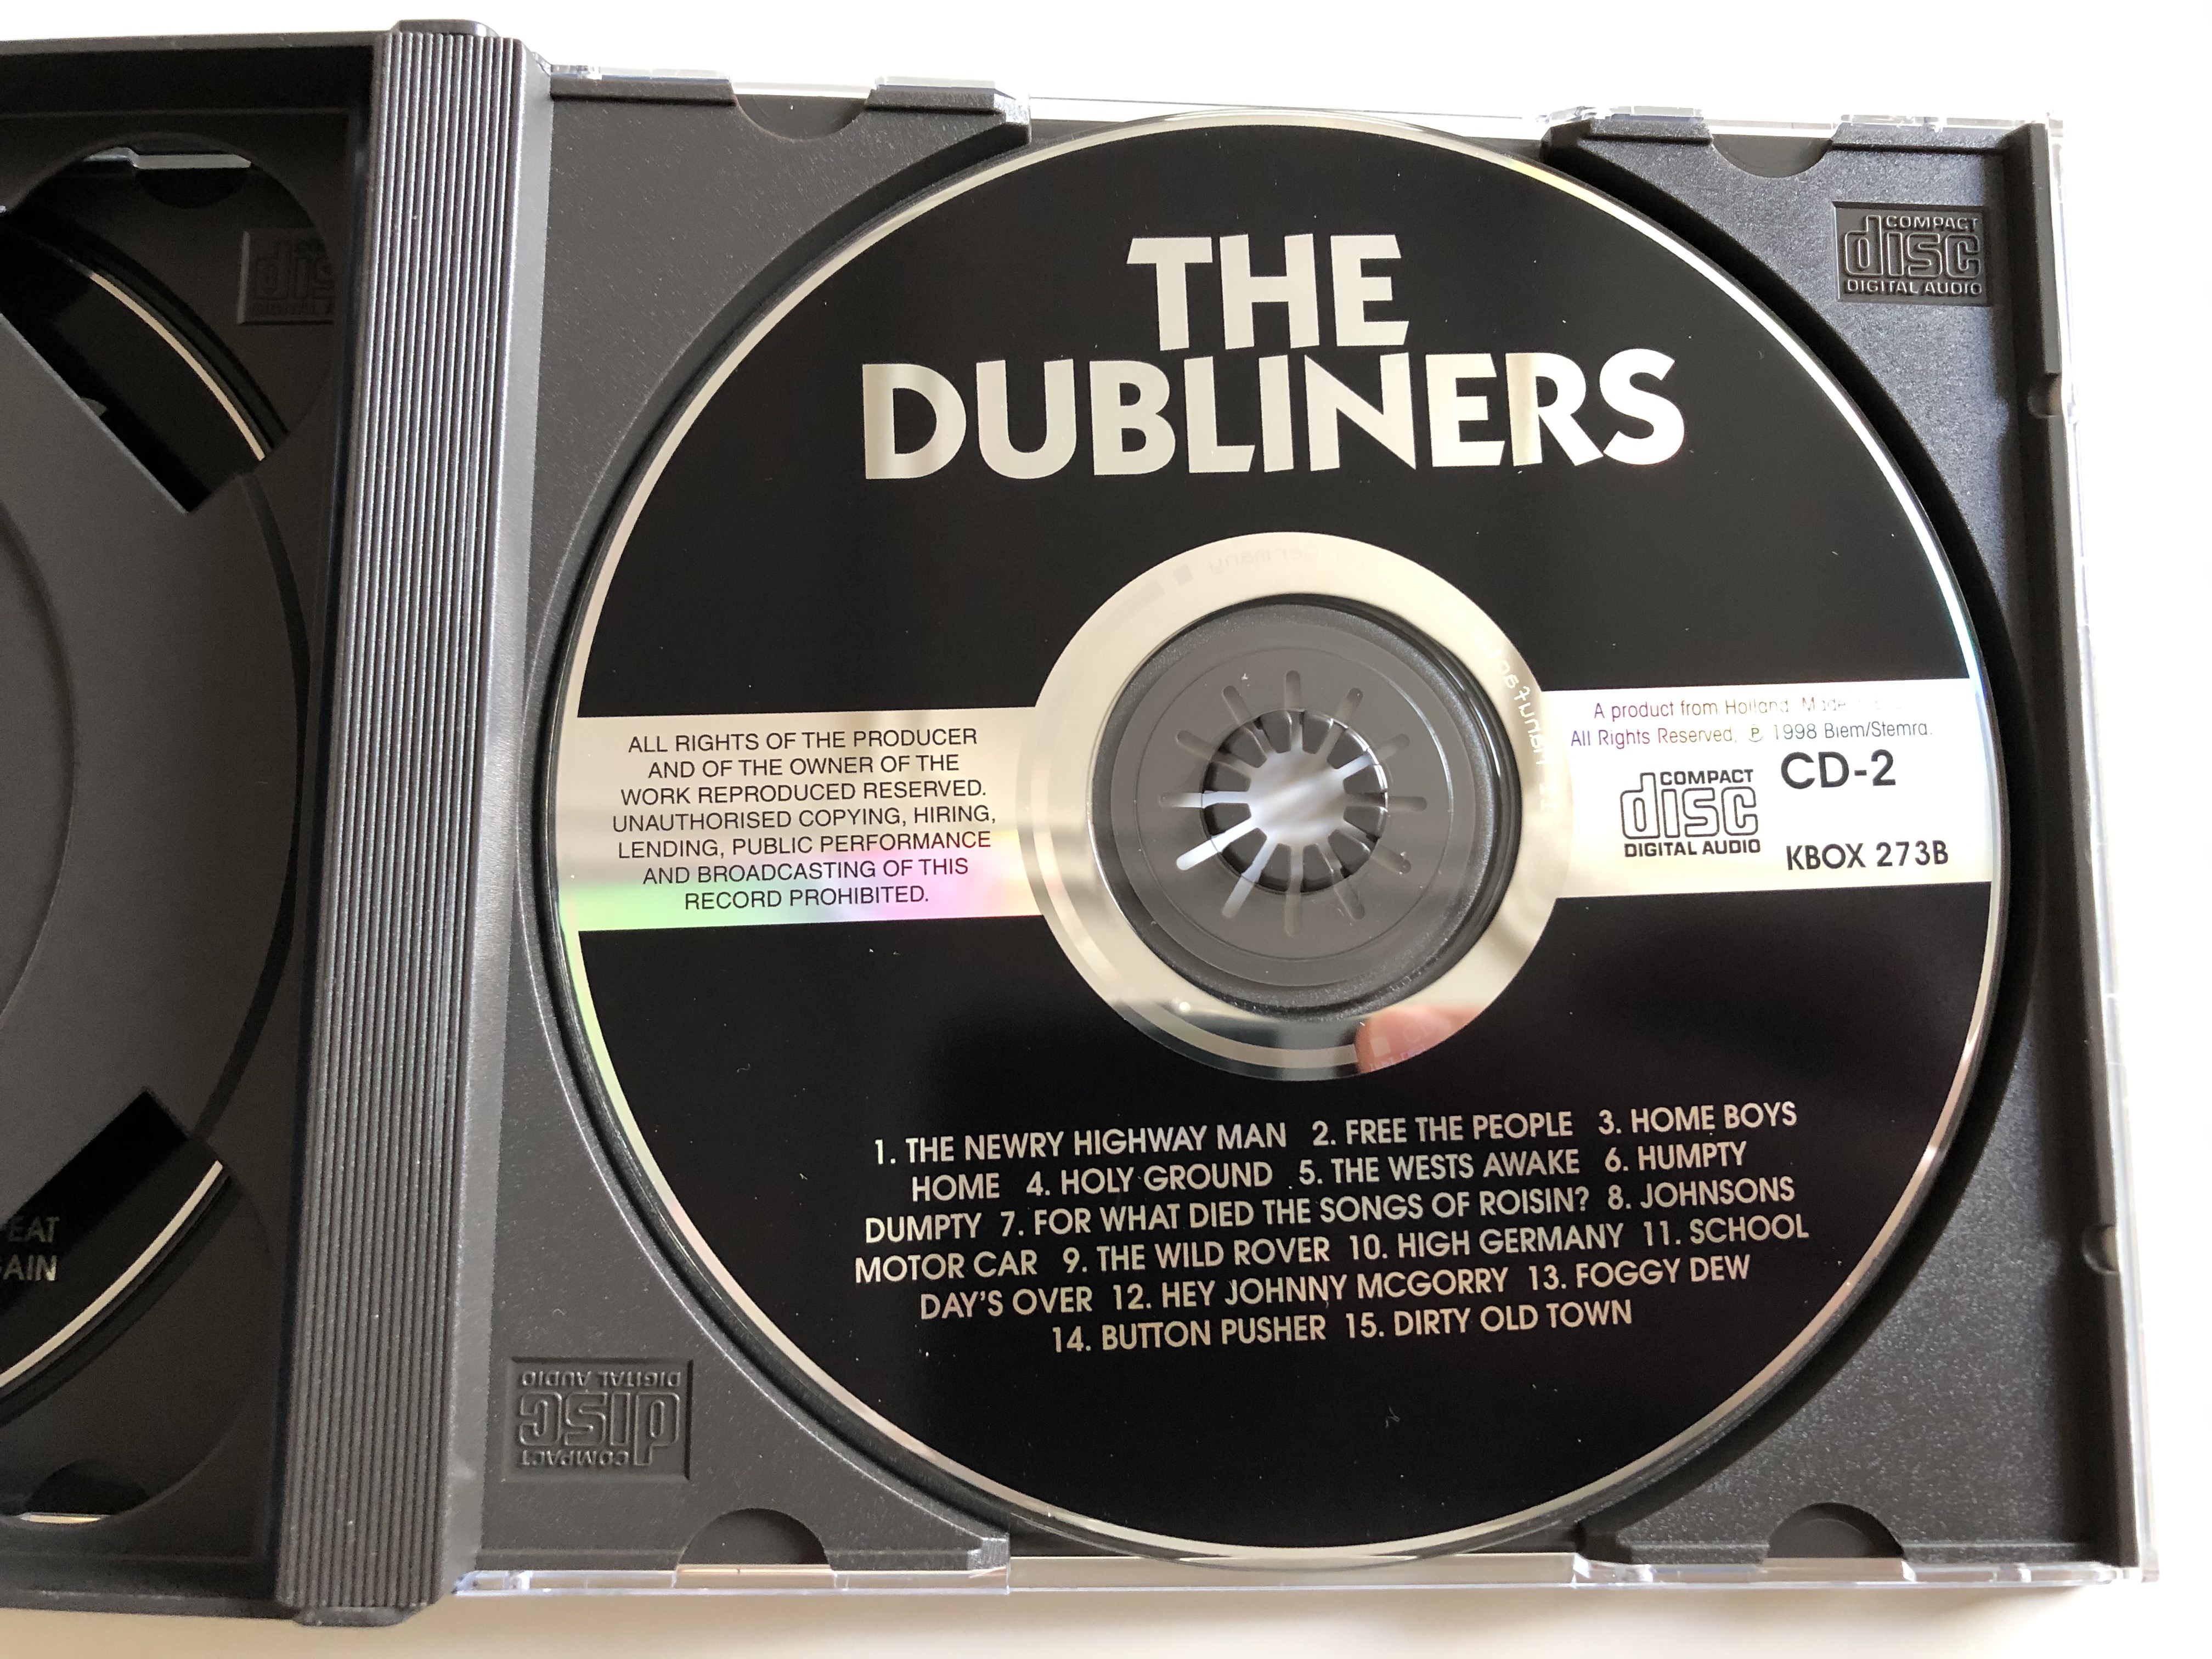 the-dubliners-hey-yohnny-mcgorry-a-nation-once-again-free-the-people-the-wild-rover-spancil-hill-weton-wesgram-2x-audio-cd-1998-kbox-273-3-.jpg